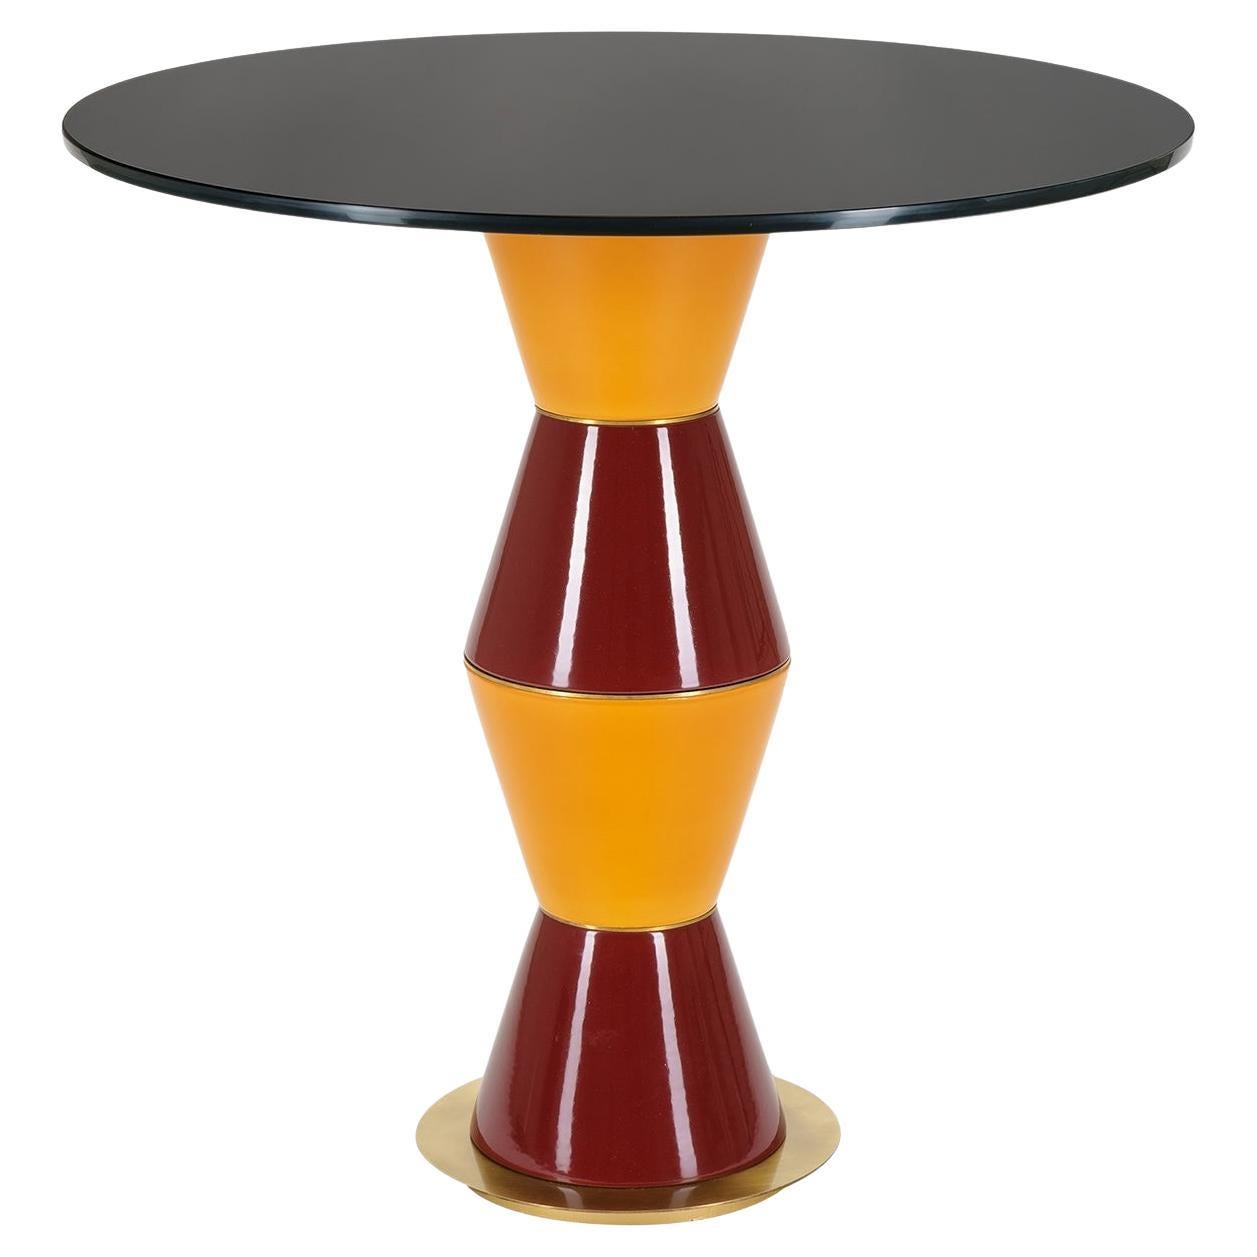 Table d'appoint ronde moyenne Palm